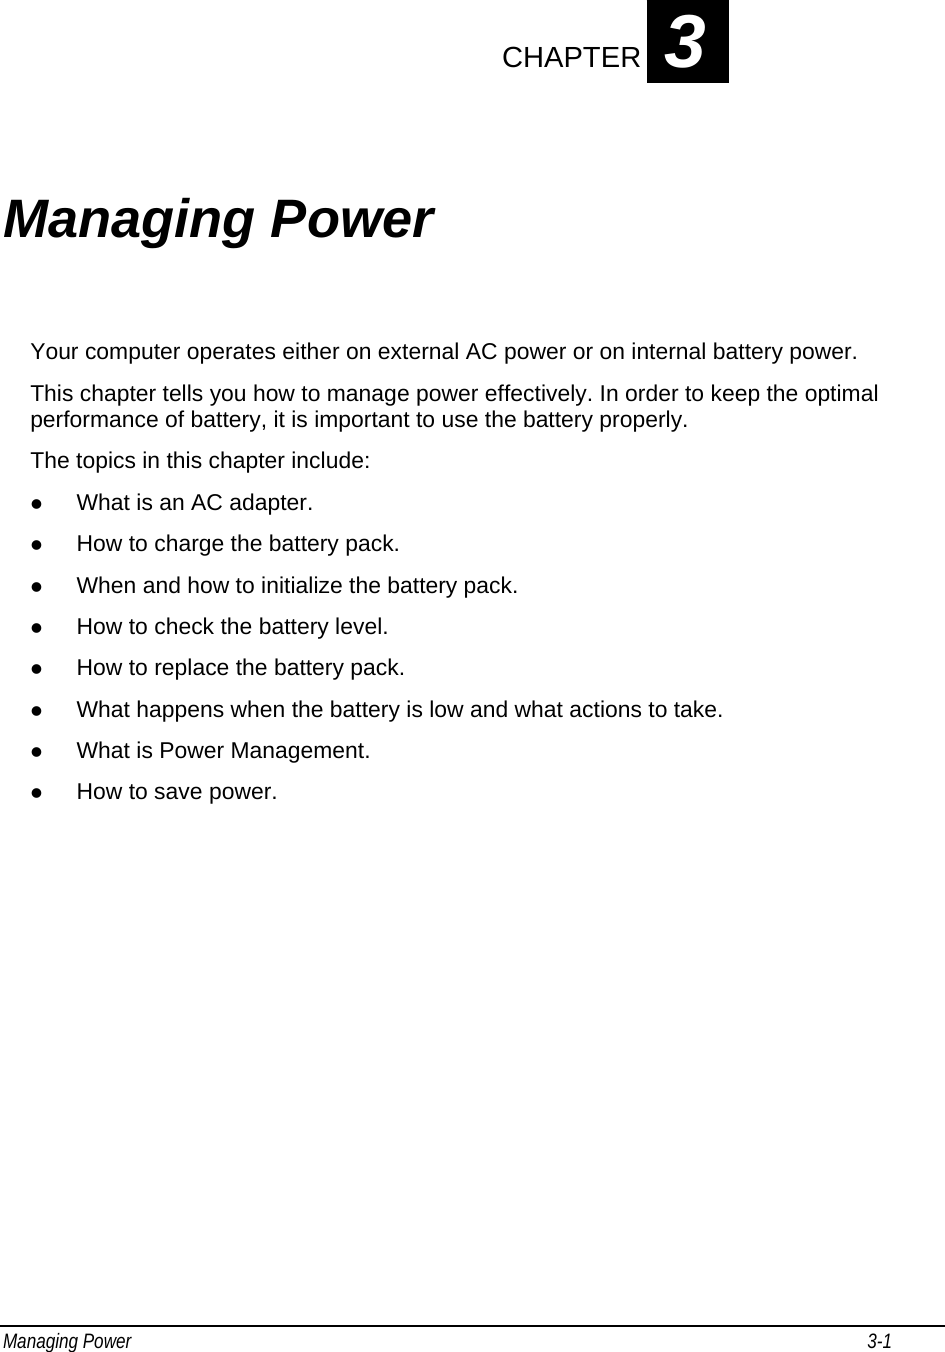 Managing Power                                                                                                                                                           3-1                                    CHAPTER 3 Managing Power Your computer operates either on external AC power or on internal battery power. This chapter tells you how to manage power effectively. In order to keep the optimal performance of battery, it is important to use the battery properly. The topics in this chapter include: z What is an AC adapter. z How to charge the battery pack. z When and how to initialize the battery pack. z How to check the battery level. z How to replace the battery pack. z What happens when the battery is low and what actions to take. z What is Power Management. z How to save power. 